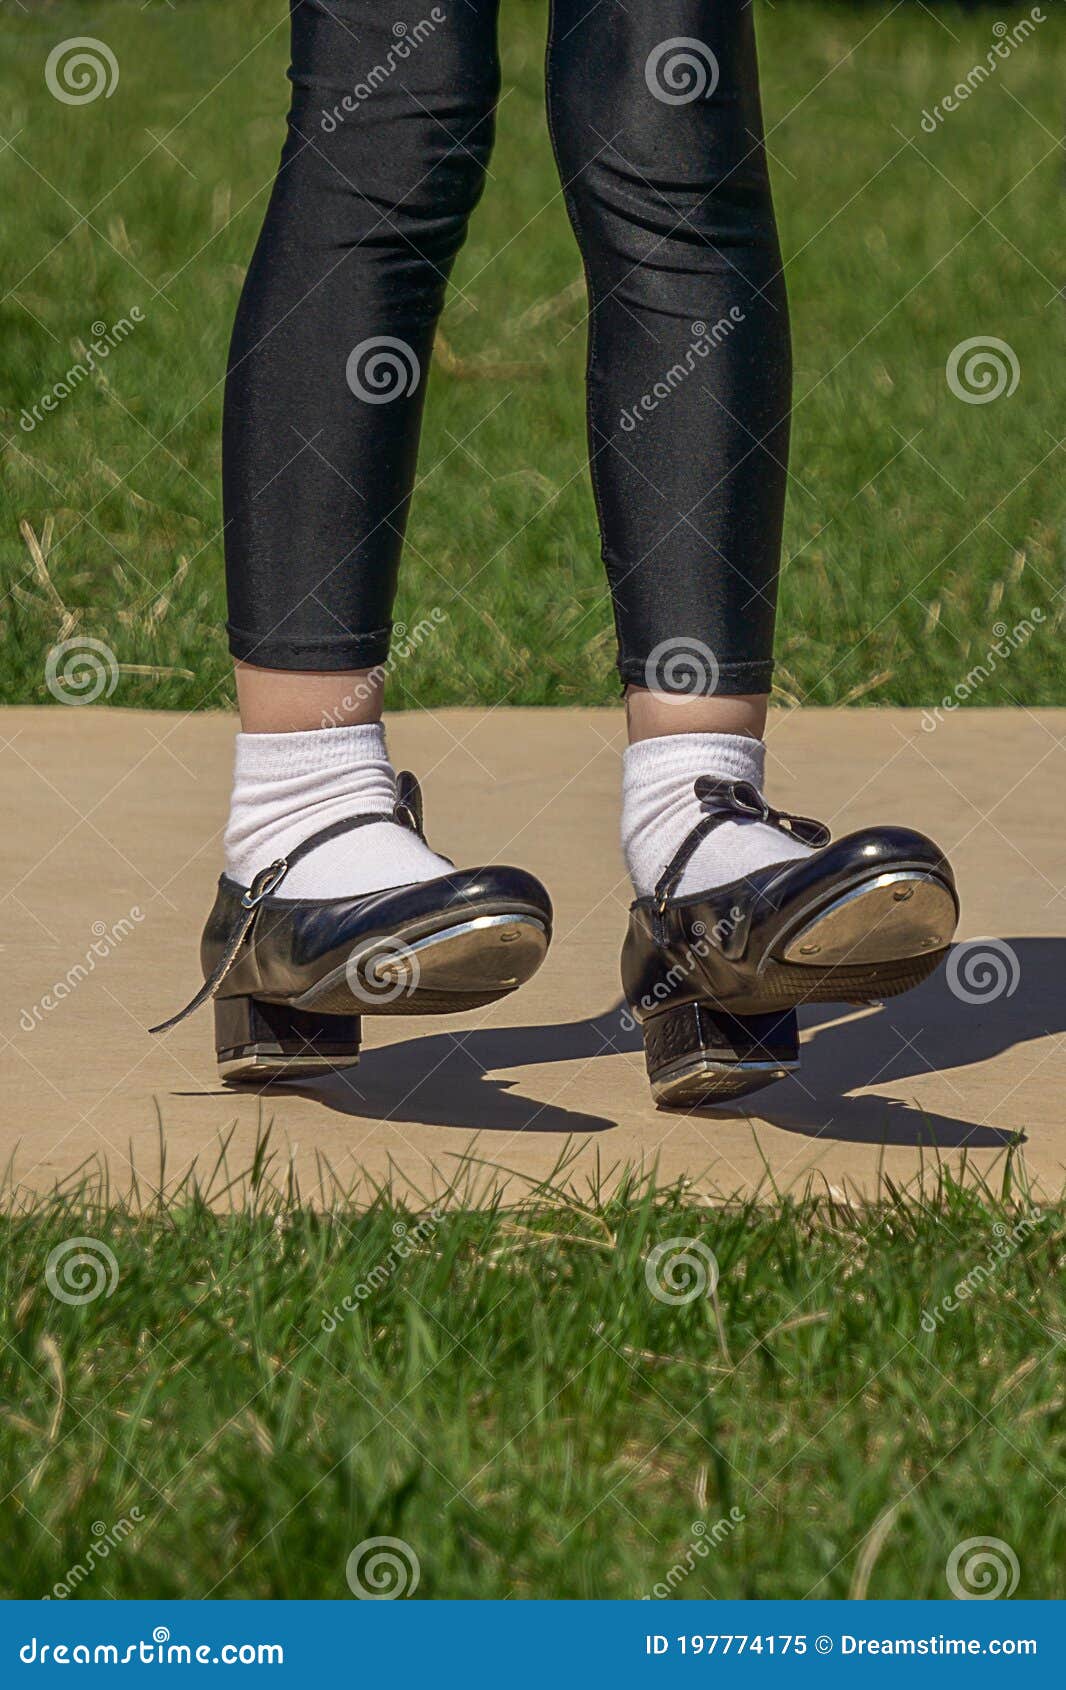 https://thumbs.dreamstime.com/z/legs-feet-young-girl-black-tap-shoes-white-socks-black-tights-legs-feet-young-girl-black-tap-shoes-white-197774175.jpg